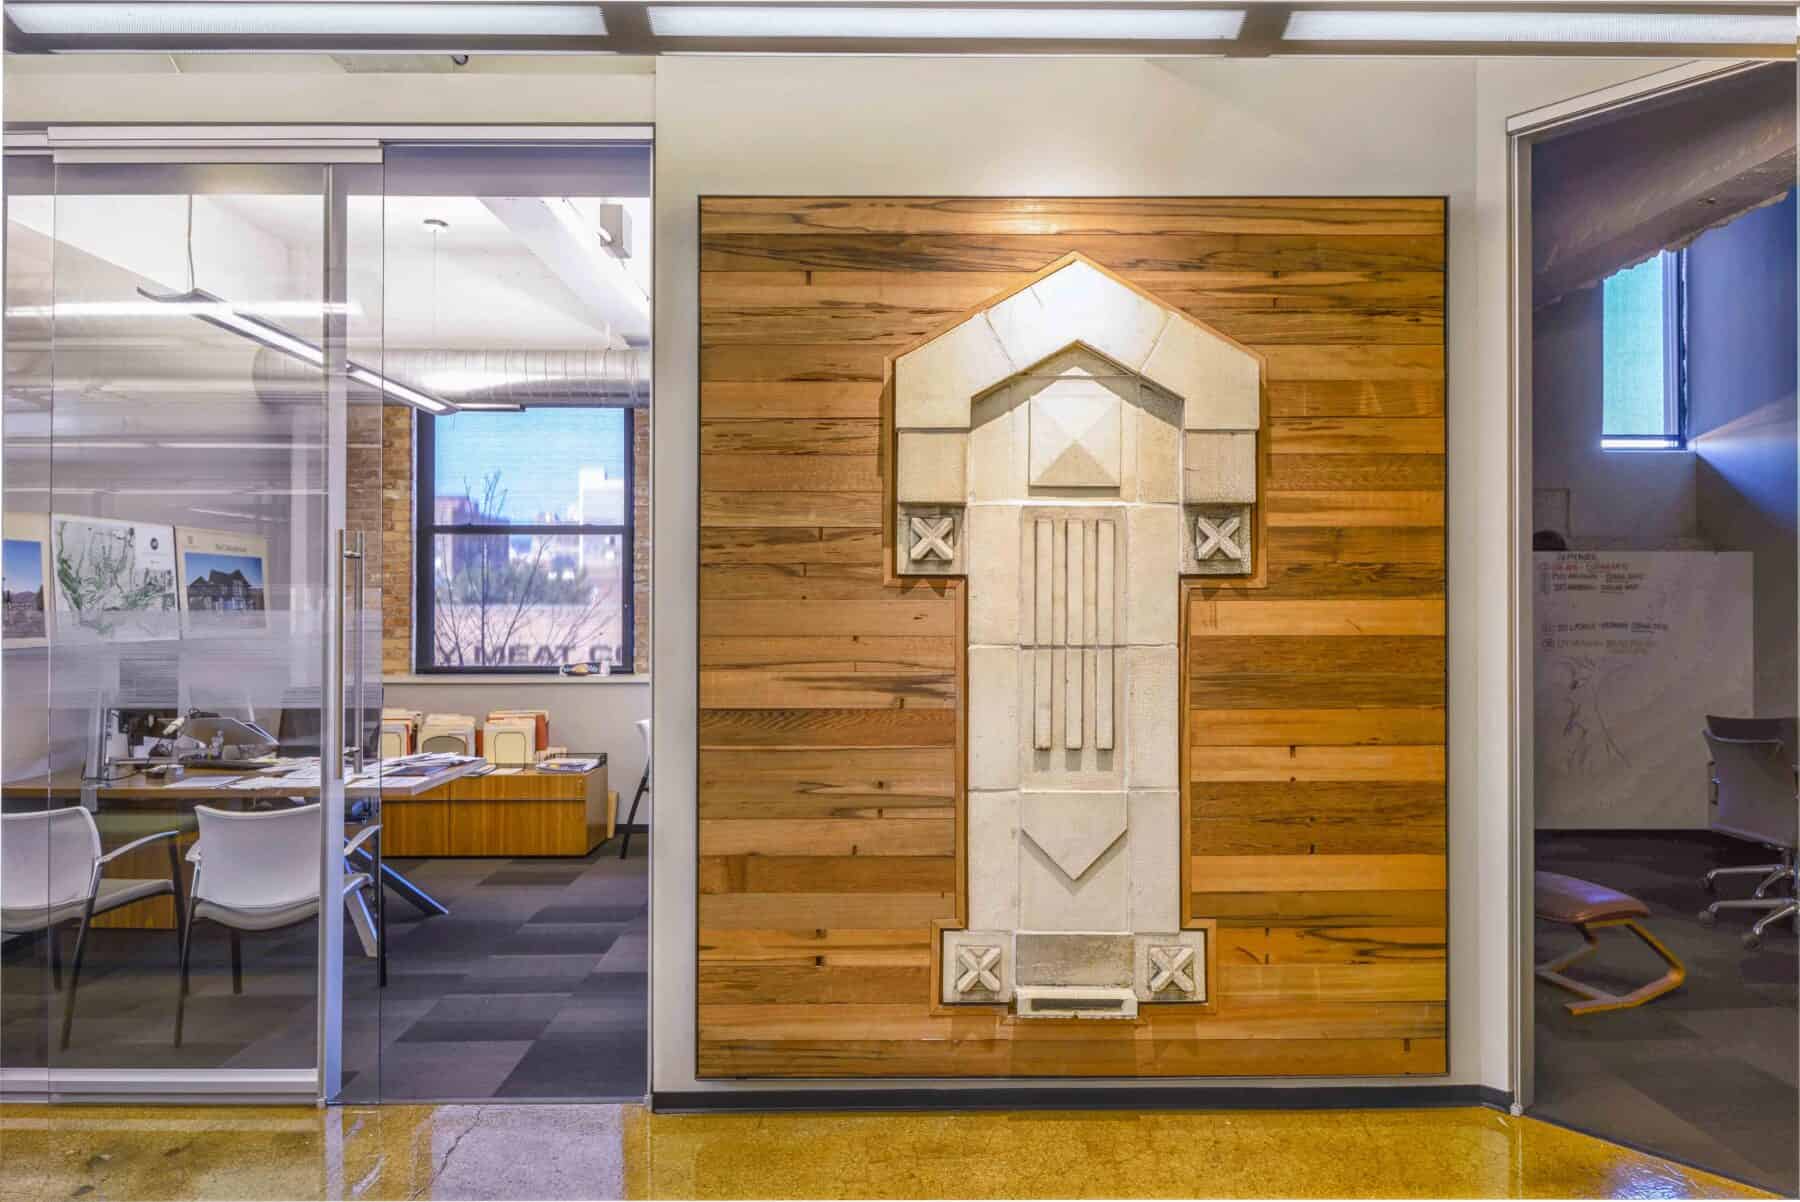 Architectural Metalwork for a Featured Wall of an Office from Construction Specialty Projects by Commercial Builder & General Contractor Structural Enterprises